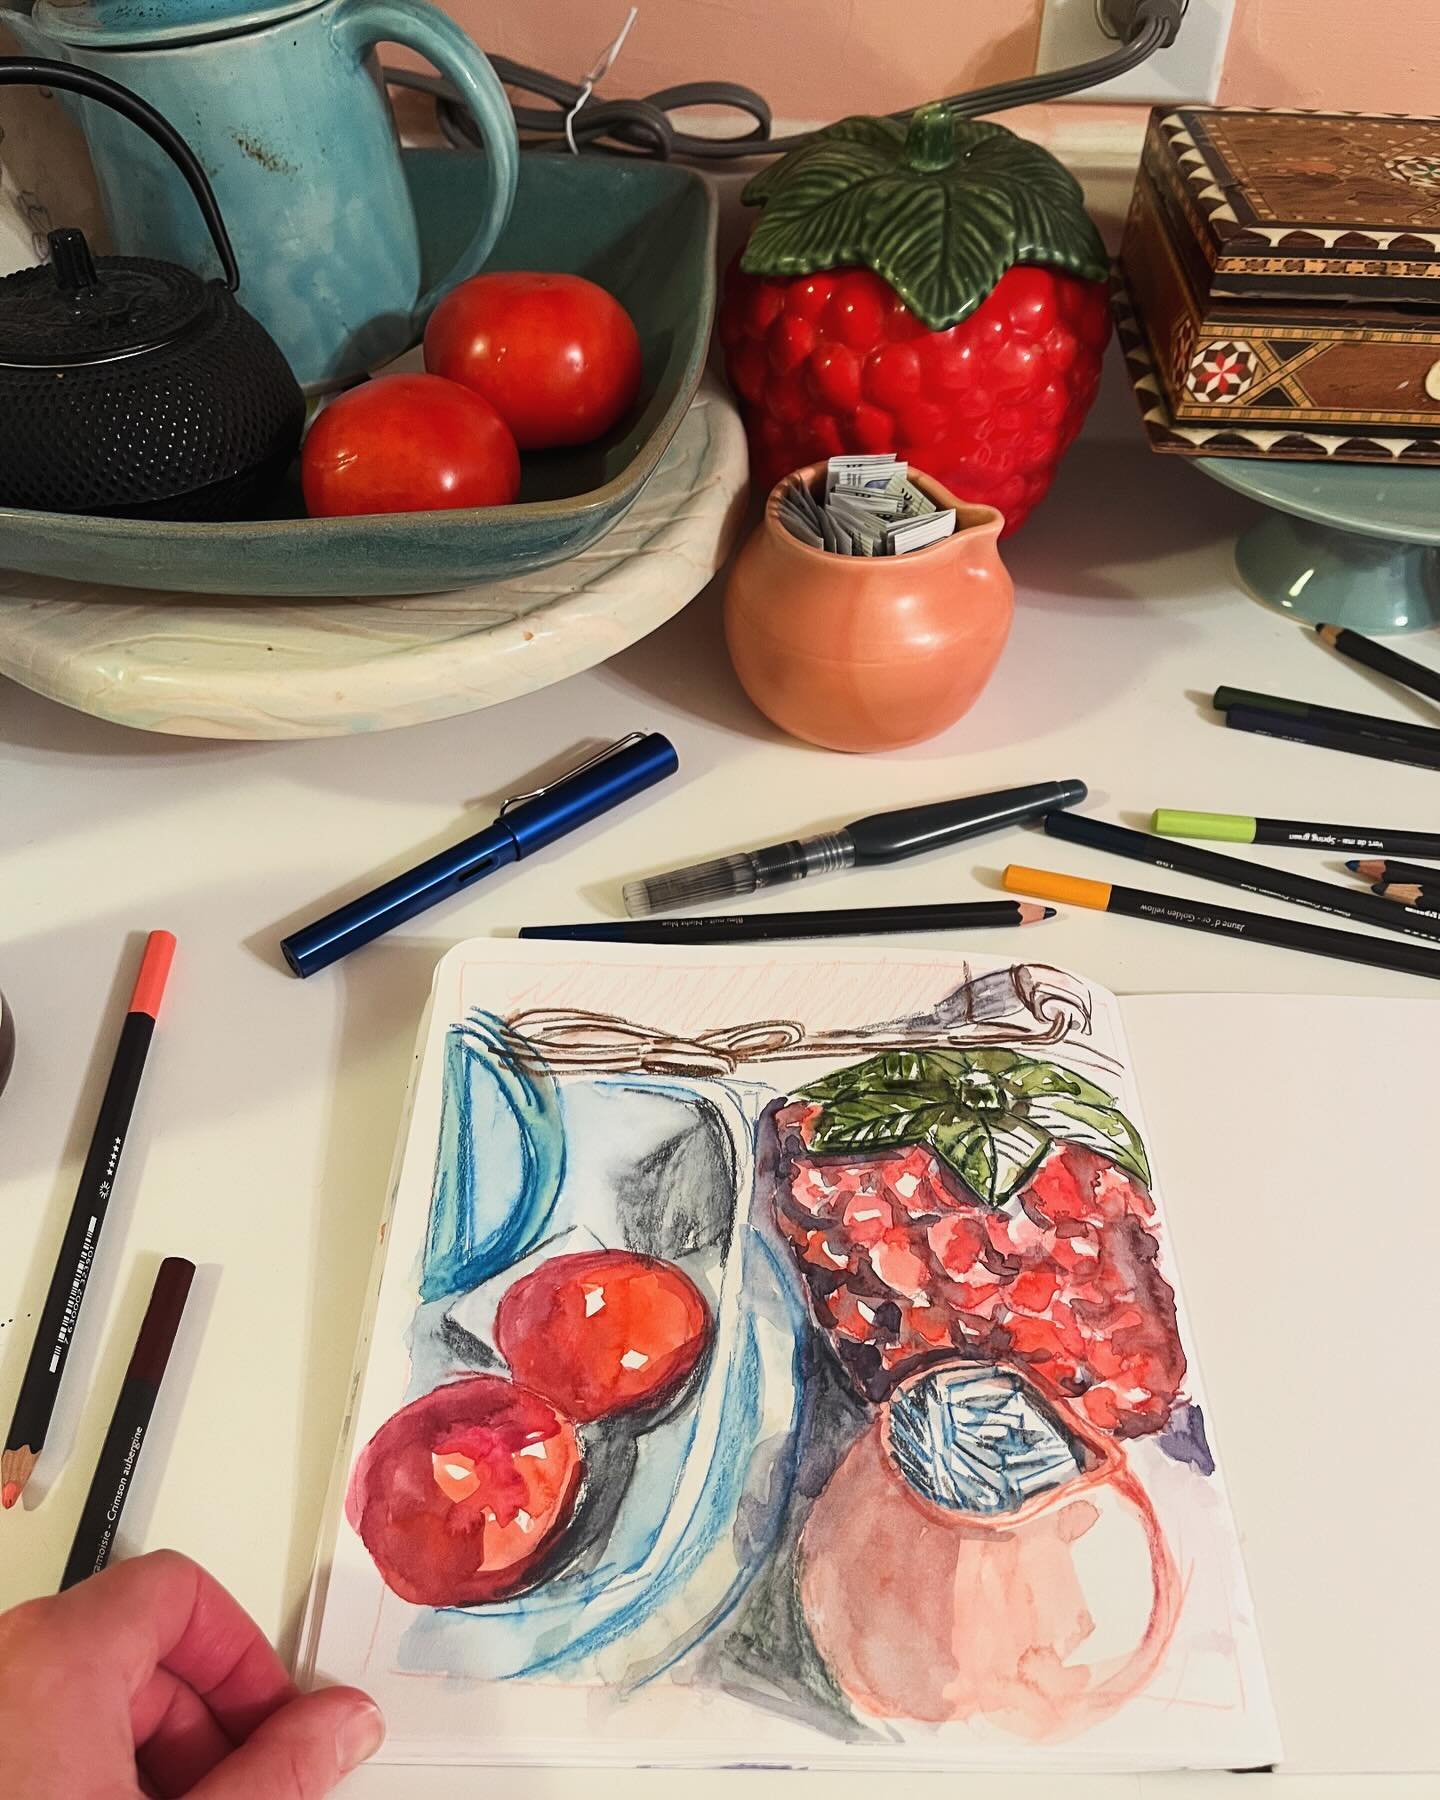 Exploring hard and soft edges for #sketchingnowedges with @lizsteelart It was so fun to work fast and loose with #watercolorpencils and #watercolor paint! #sketchbook #carandachemuseumaquarelle #romanszmal #stilllifesketch #sketchfromlife